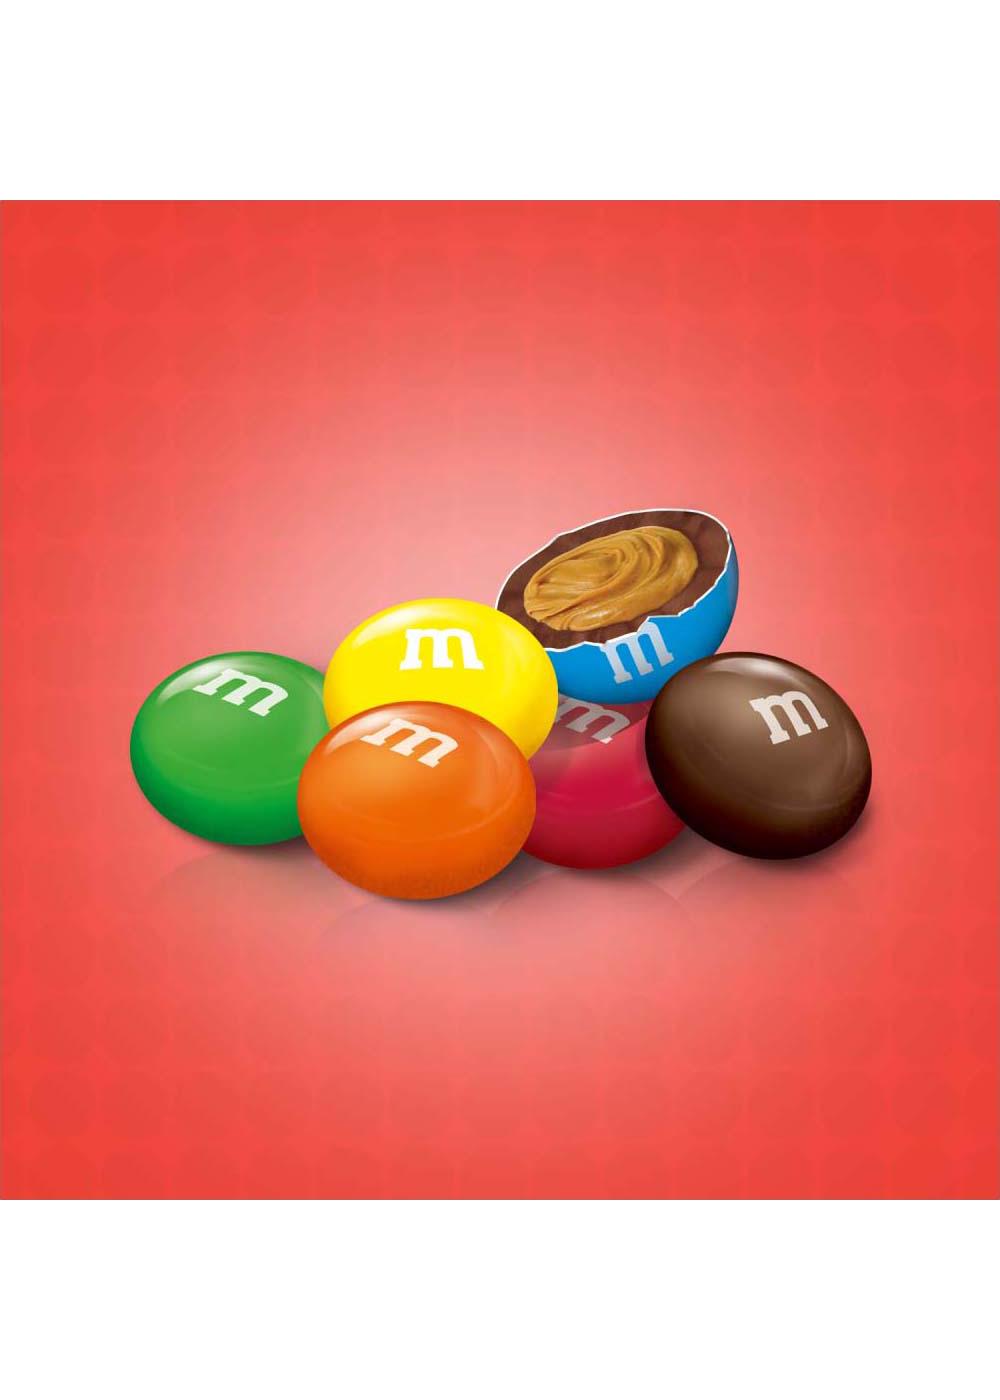 M&M'S Peanut Butter Chocolate Candy Party Size Bag, 38 oz